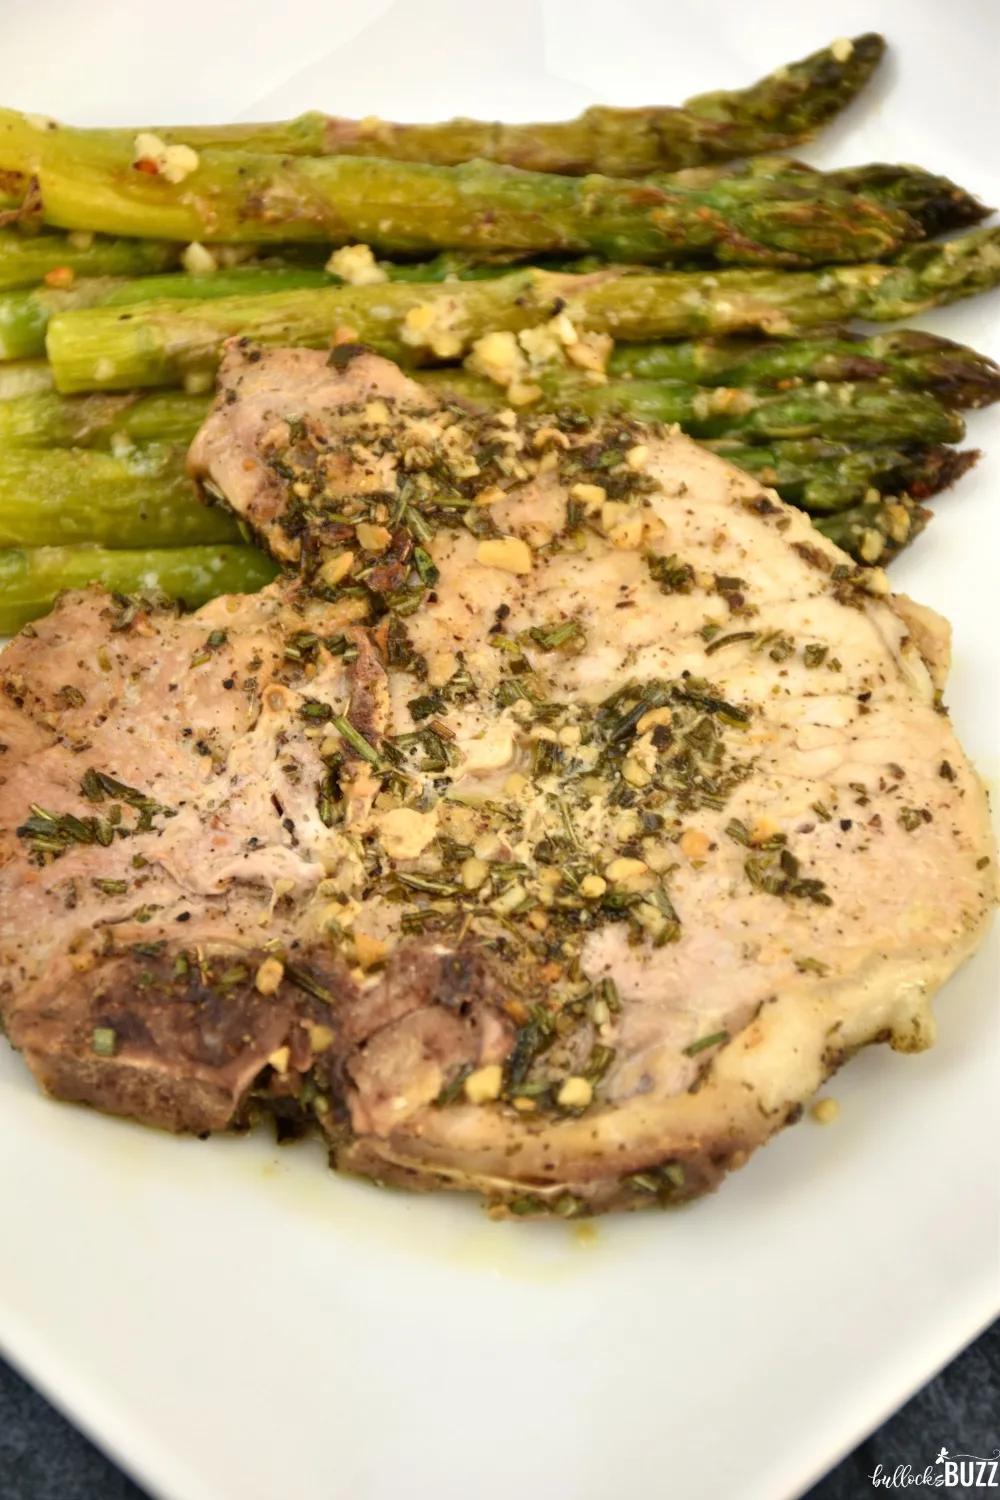 It really doesn't get any easier than this Rosemary Sage Pork Chop dinner recipe. Simply sauté the herbs in olive oil. Add in the pork chops. And cook until they're ready. That’s it. You’re done!